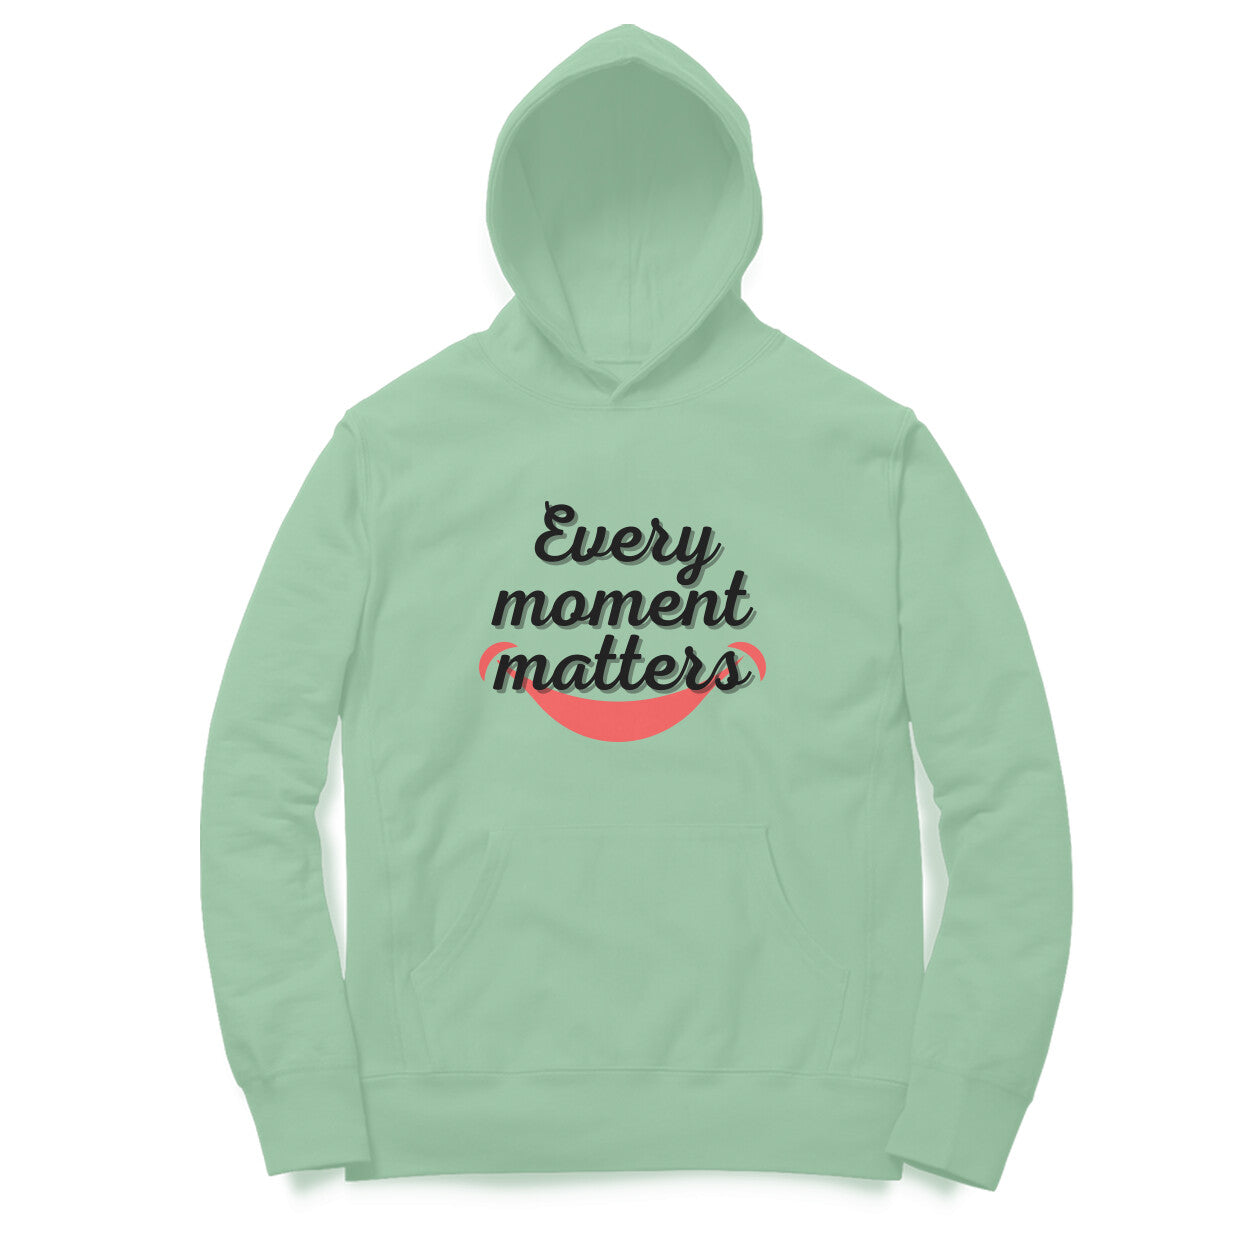 Every Moment Matters Unisex Hoodies